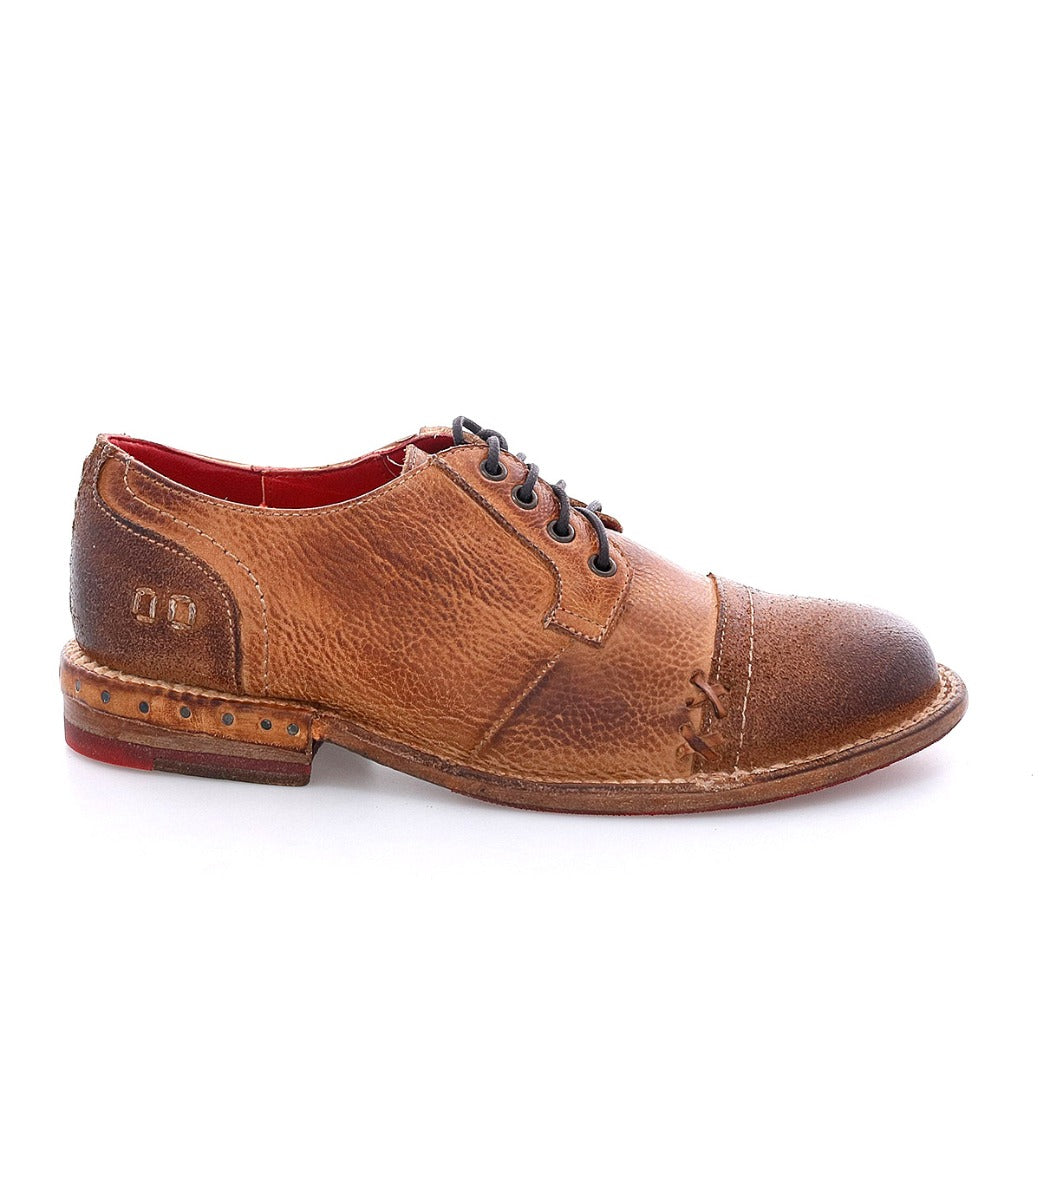 A men's brown Bed Stu Plio derby shoe with a red sole.